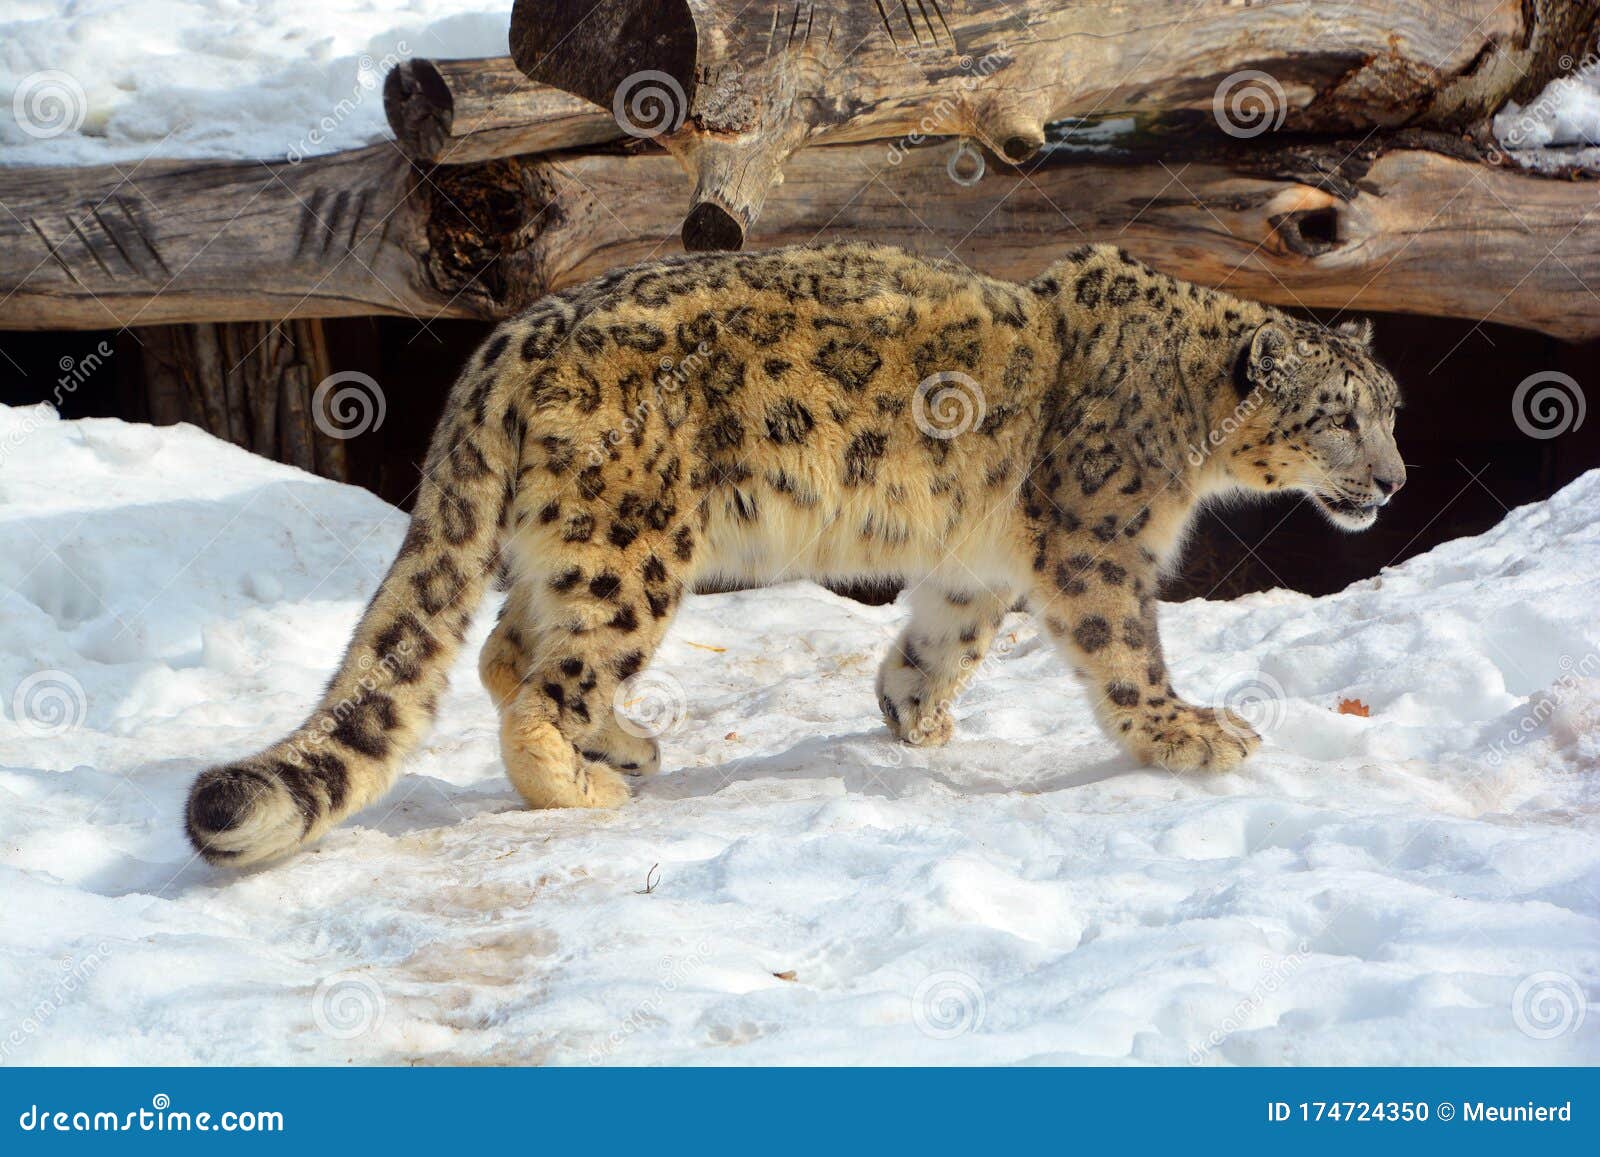 The Snow Leopard is a Large Cat To the Mountain Ranges of and South Asia. Stock Photo - Image of central, male: 174724350